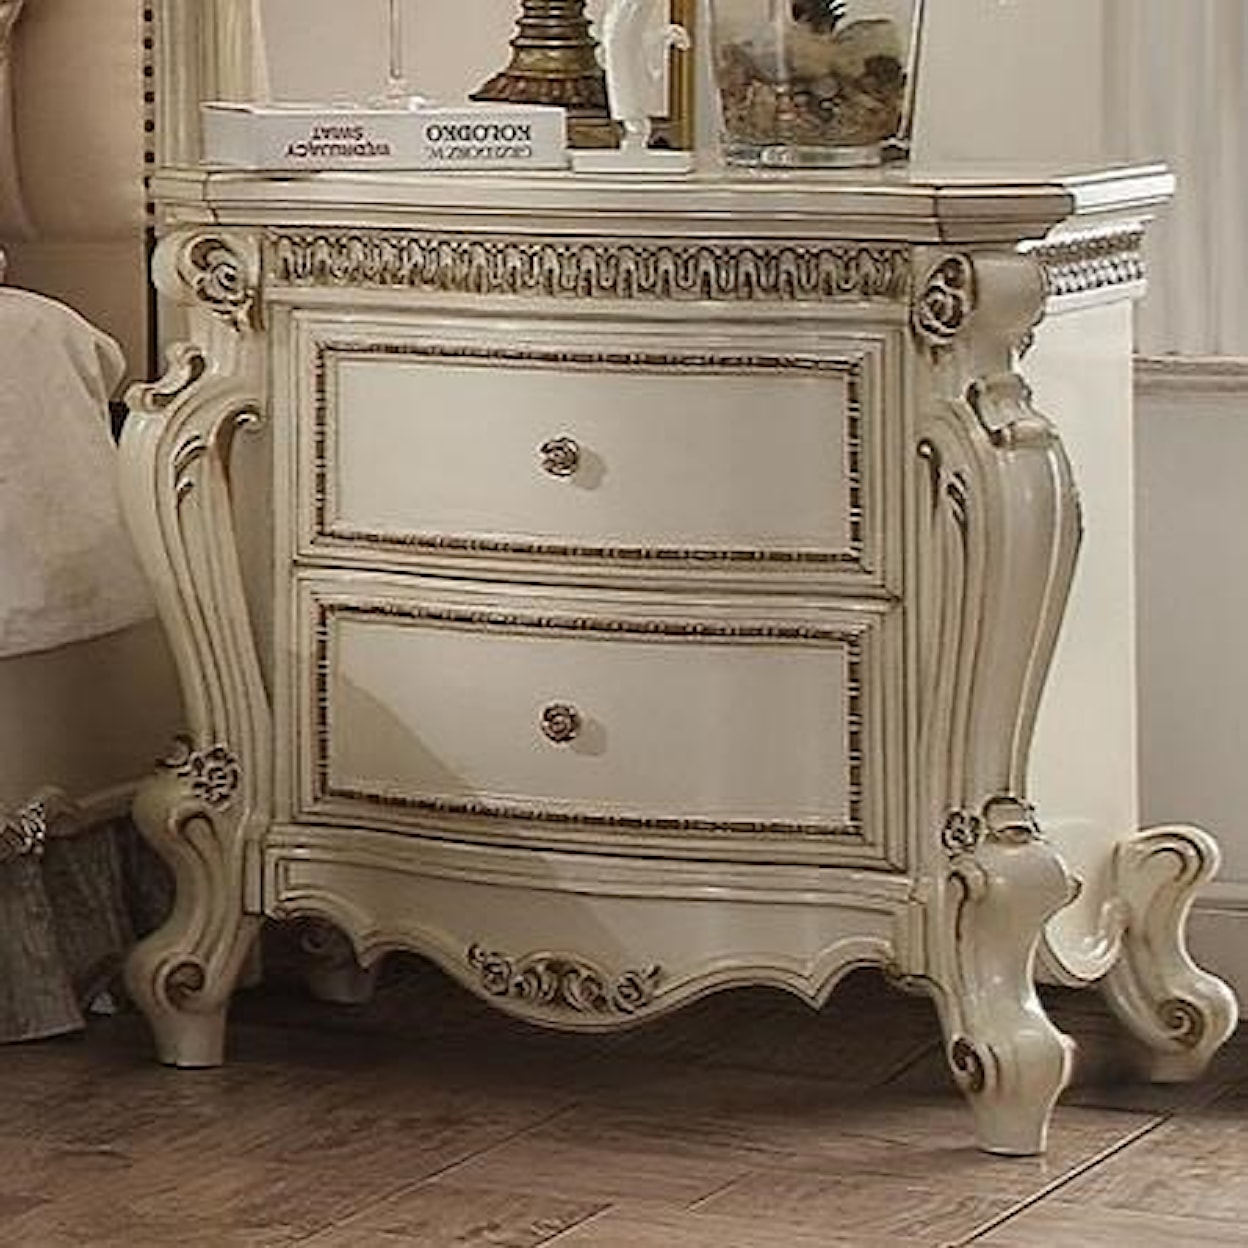 Acme Furniture Picardy Nightstand